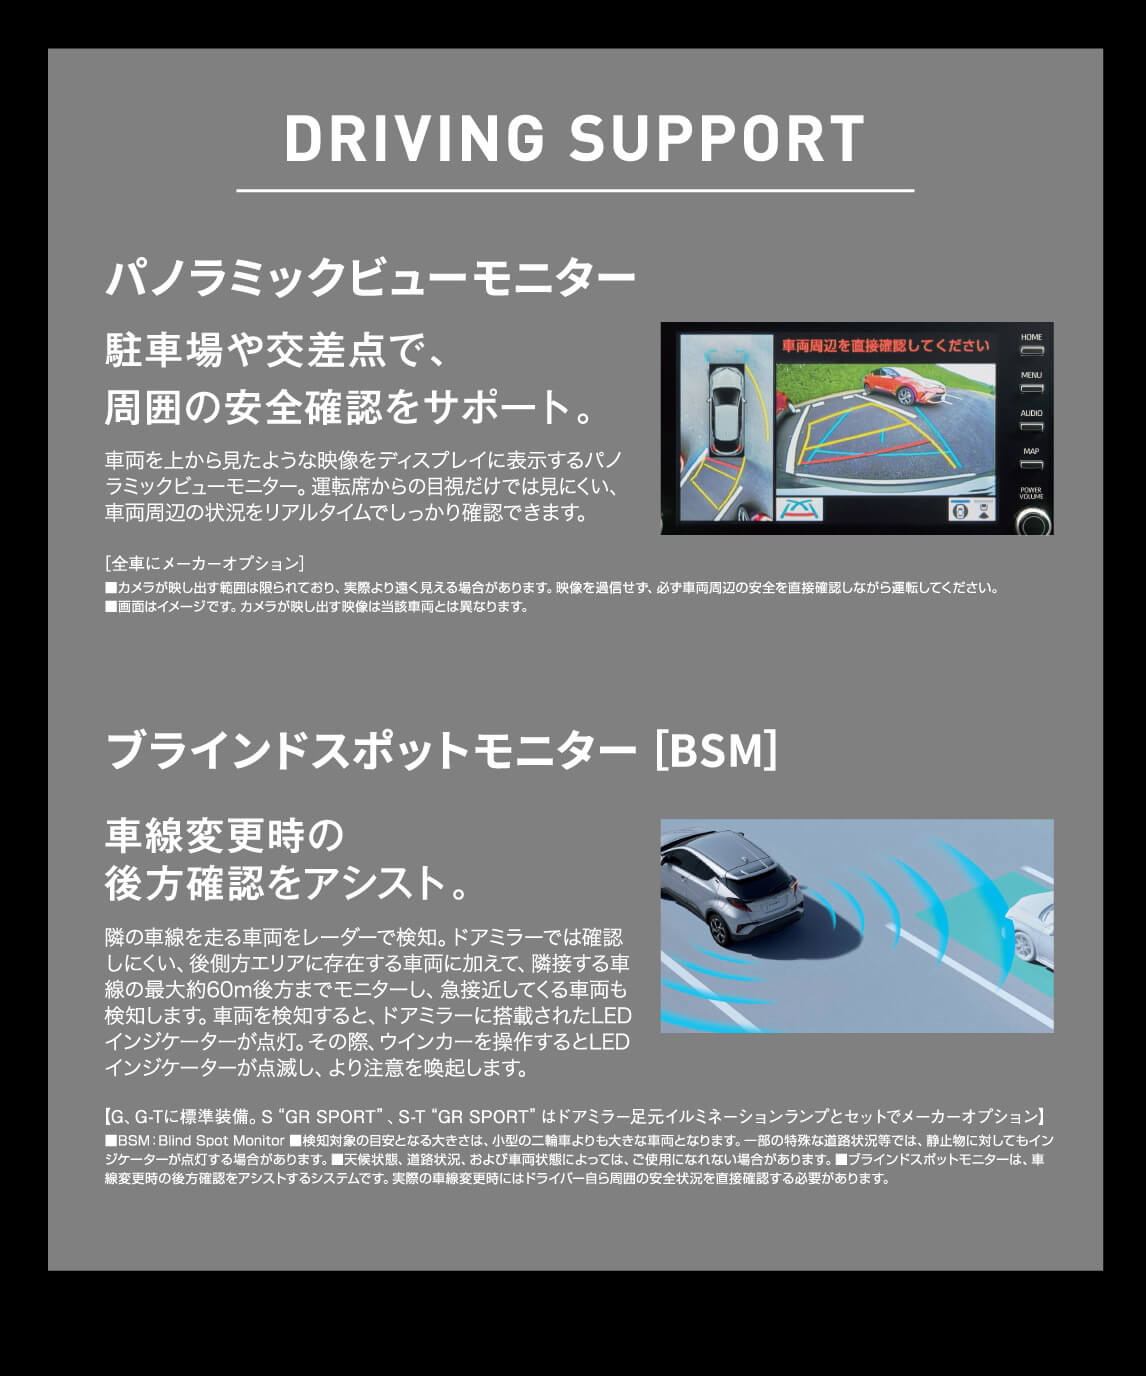 DRIVING SUPPORT